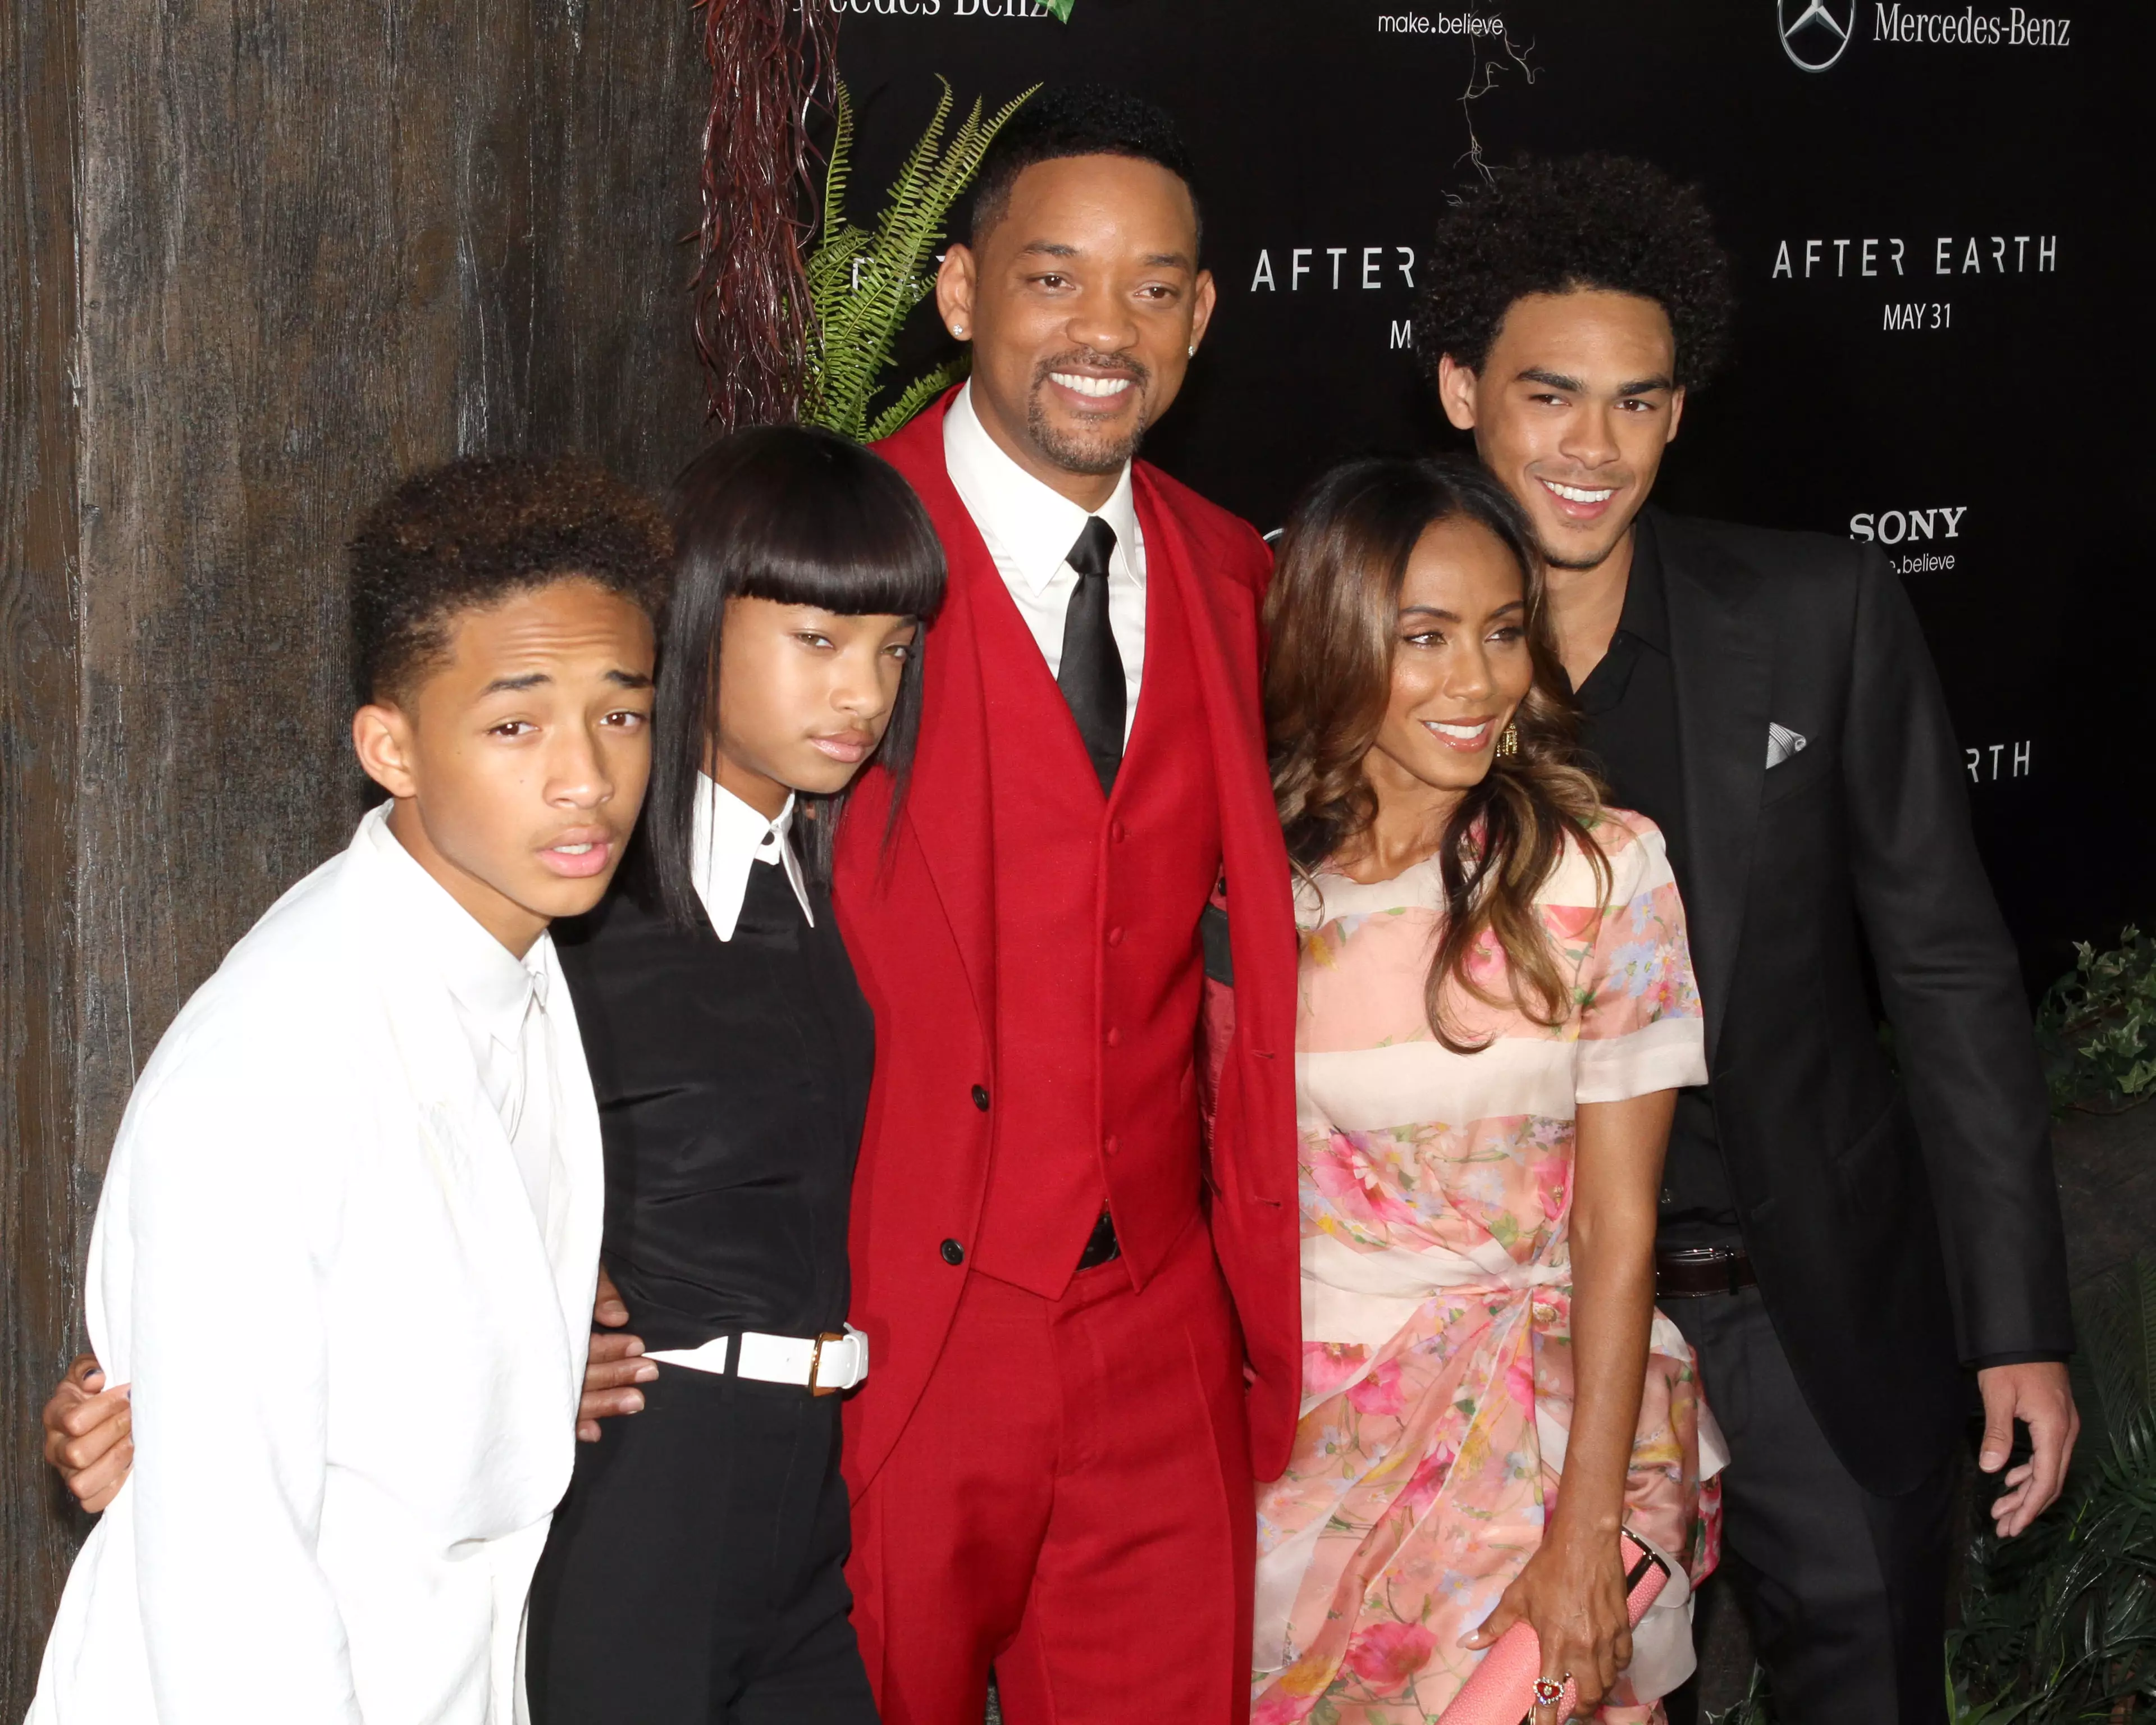 The Smith family at the After Earth premiere.